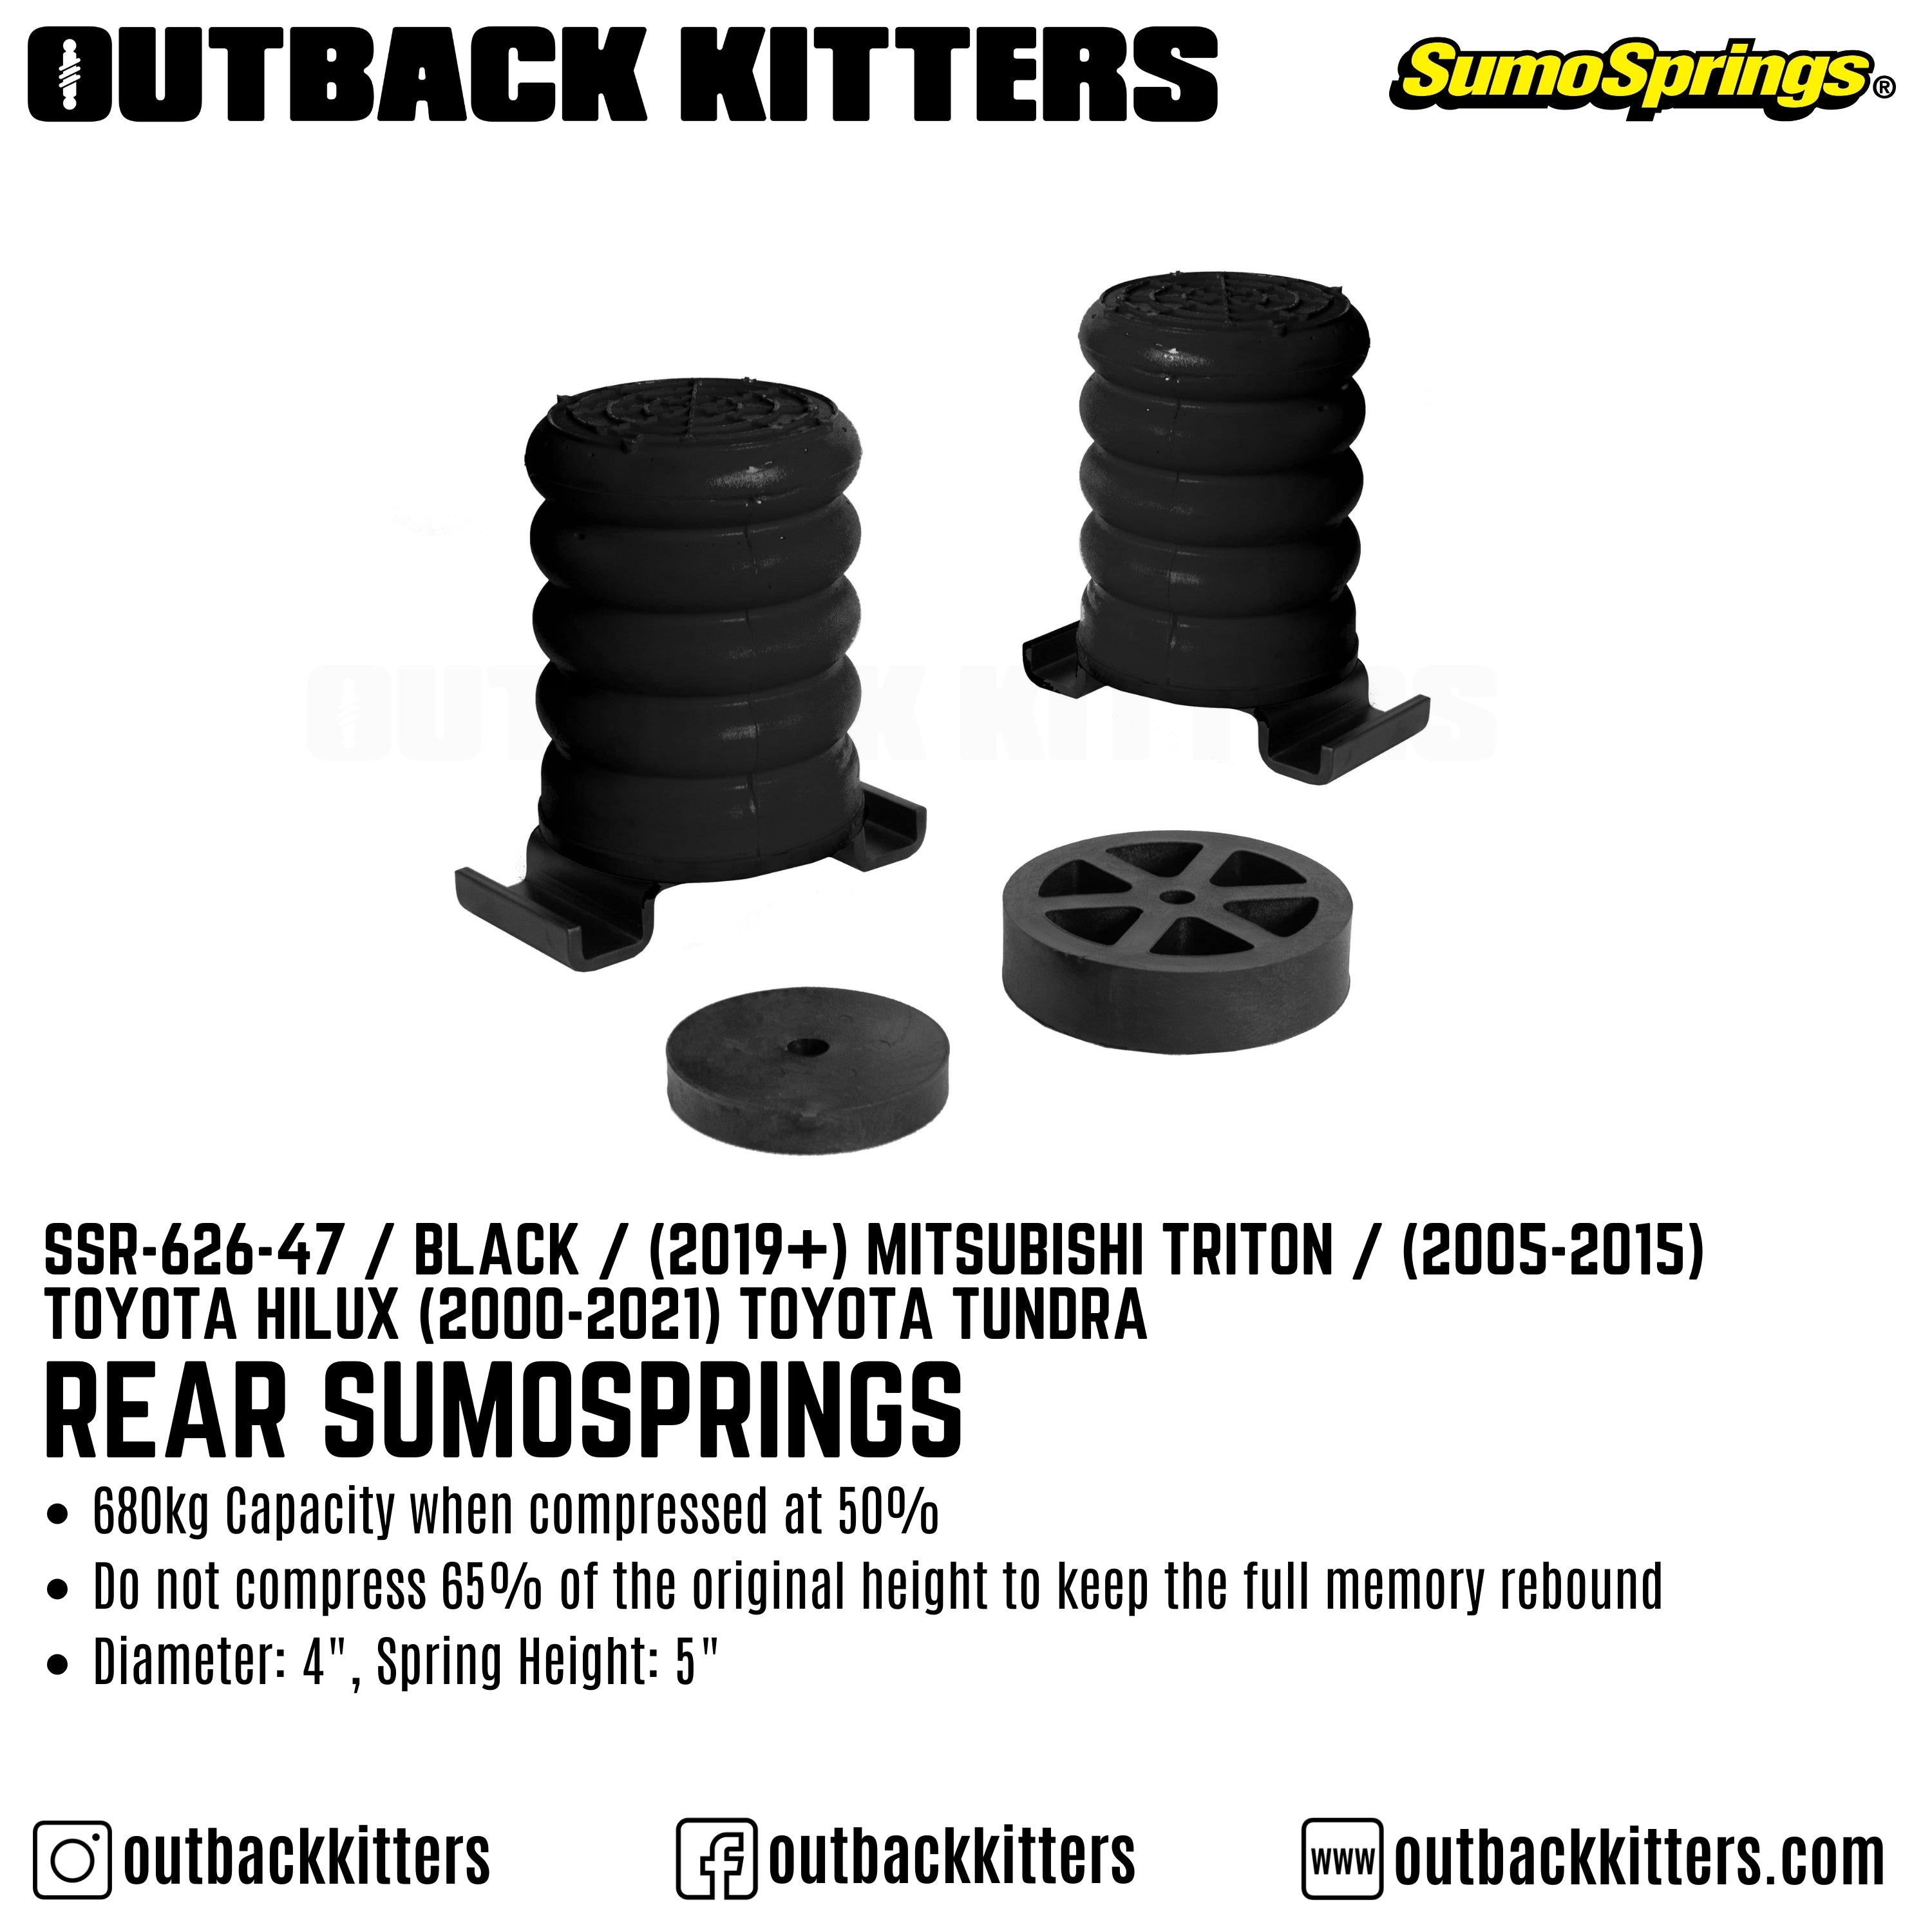 Rear SumoSprings to suit 2019+ Mitsubishi Triton / 2005-15 Toyota Hilux / 2000-21 Toyota Tundra - Outback Kitters